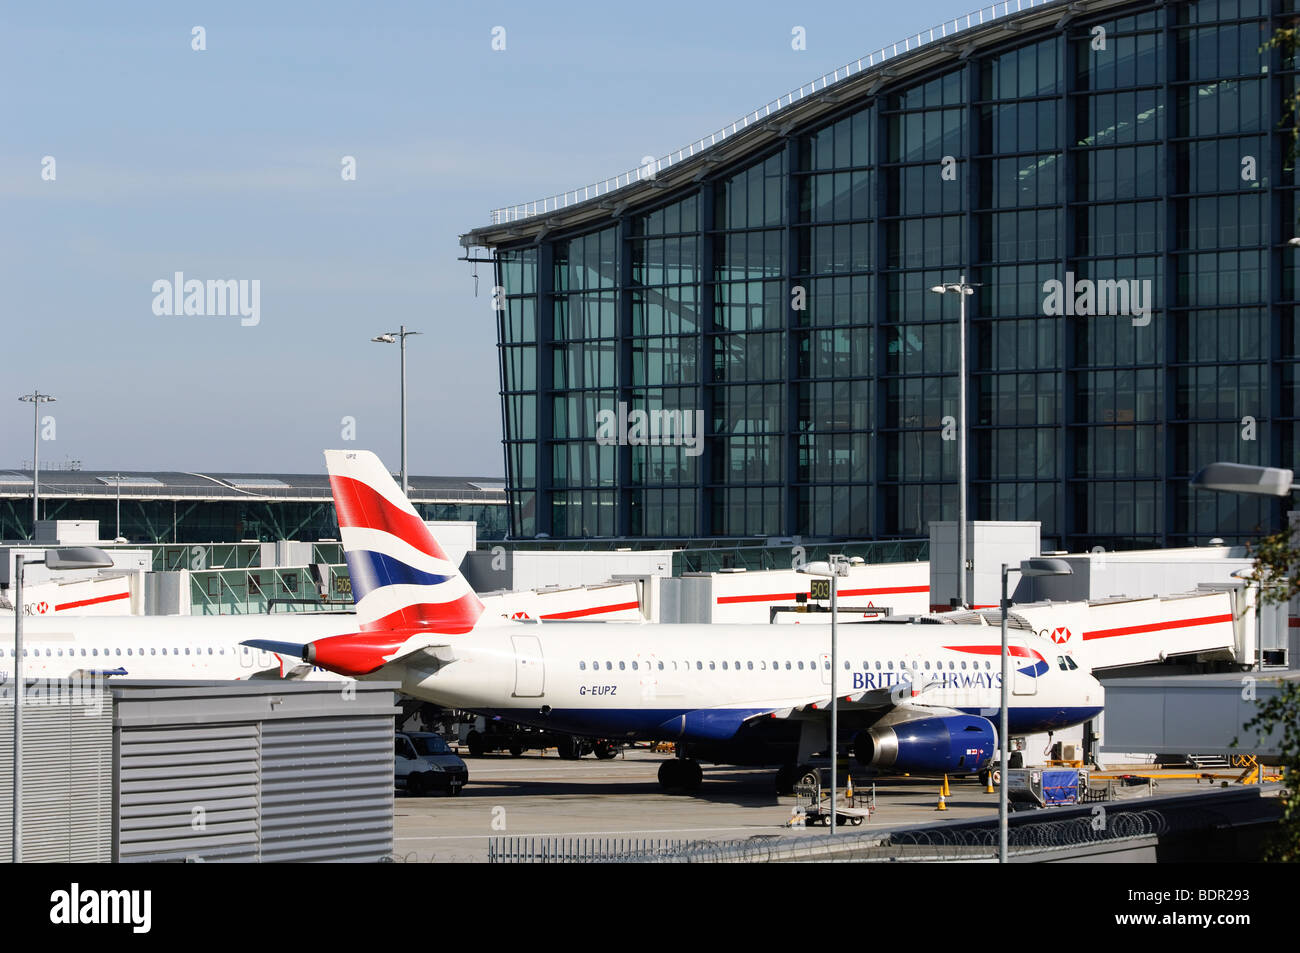 British Airways Airbus A320 in front of Terminal 5, London Heathrow Airport, UK. Stock Photo